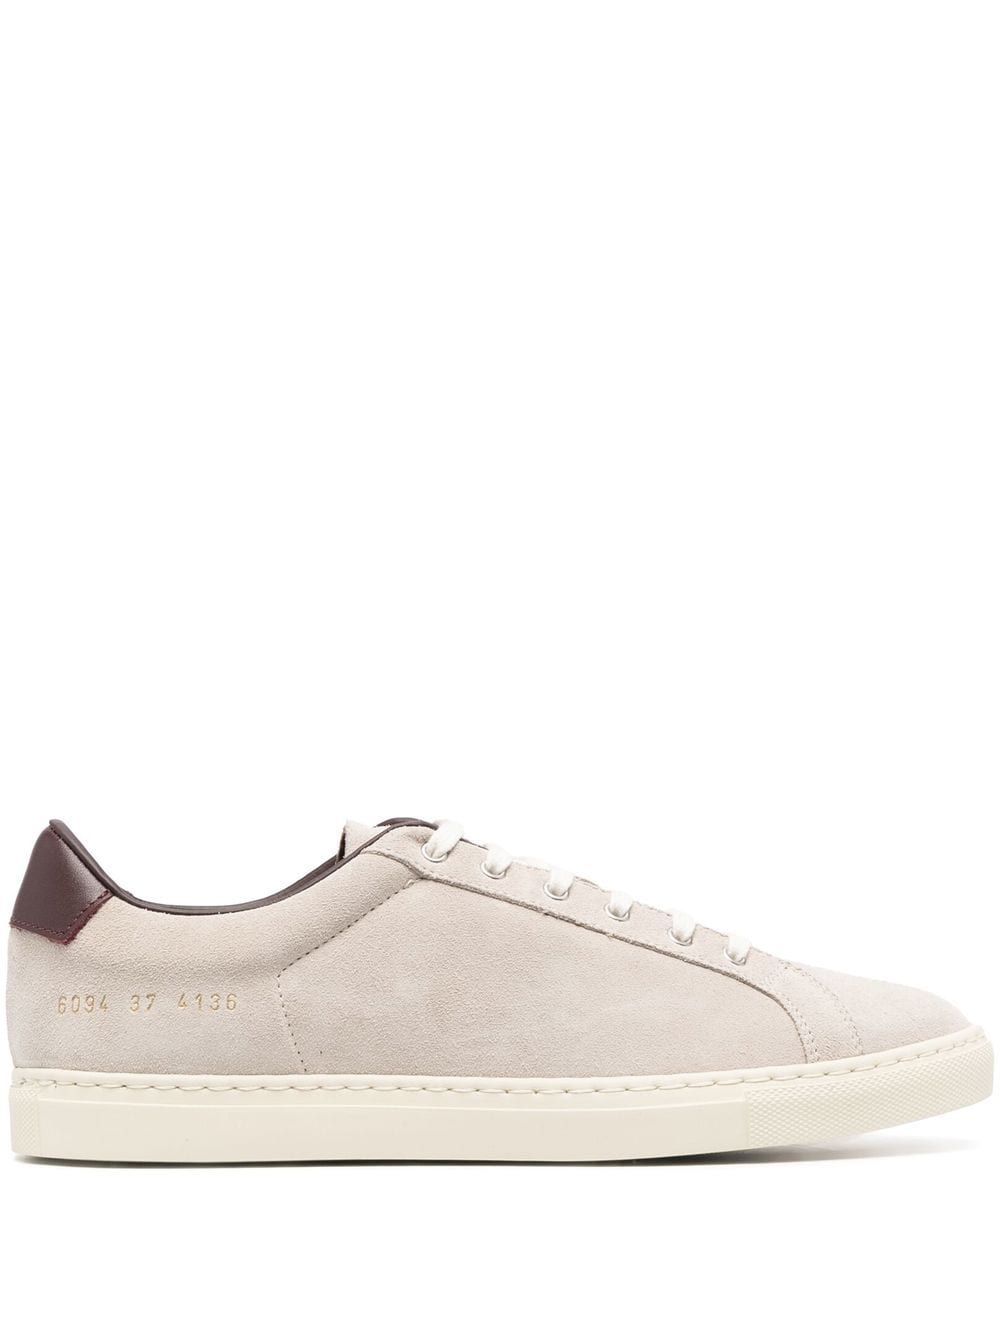 Common Projects Retro low-top Sneakers - Farfetch